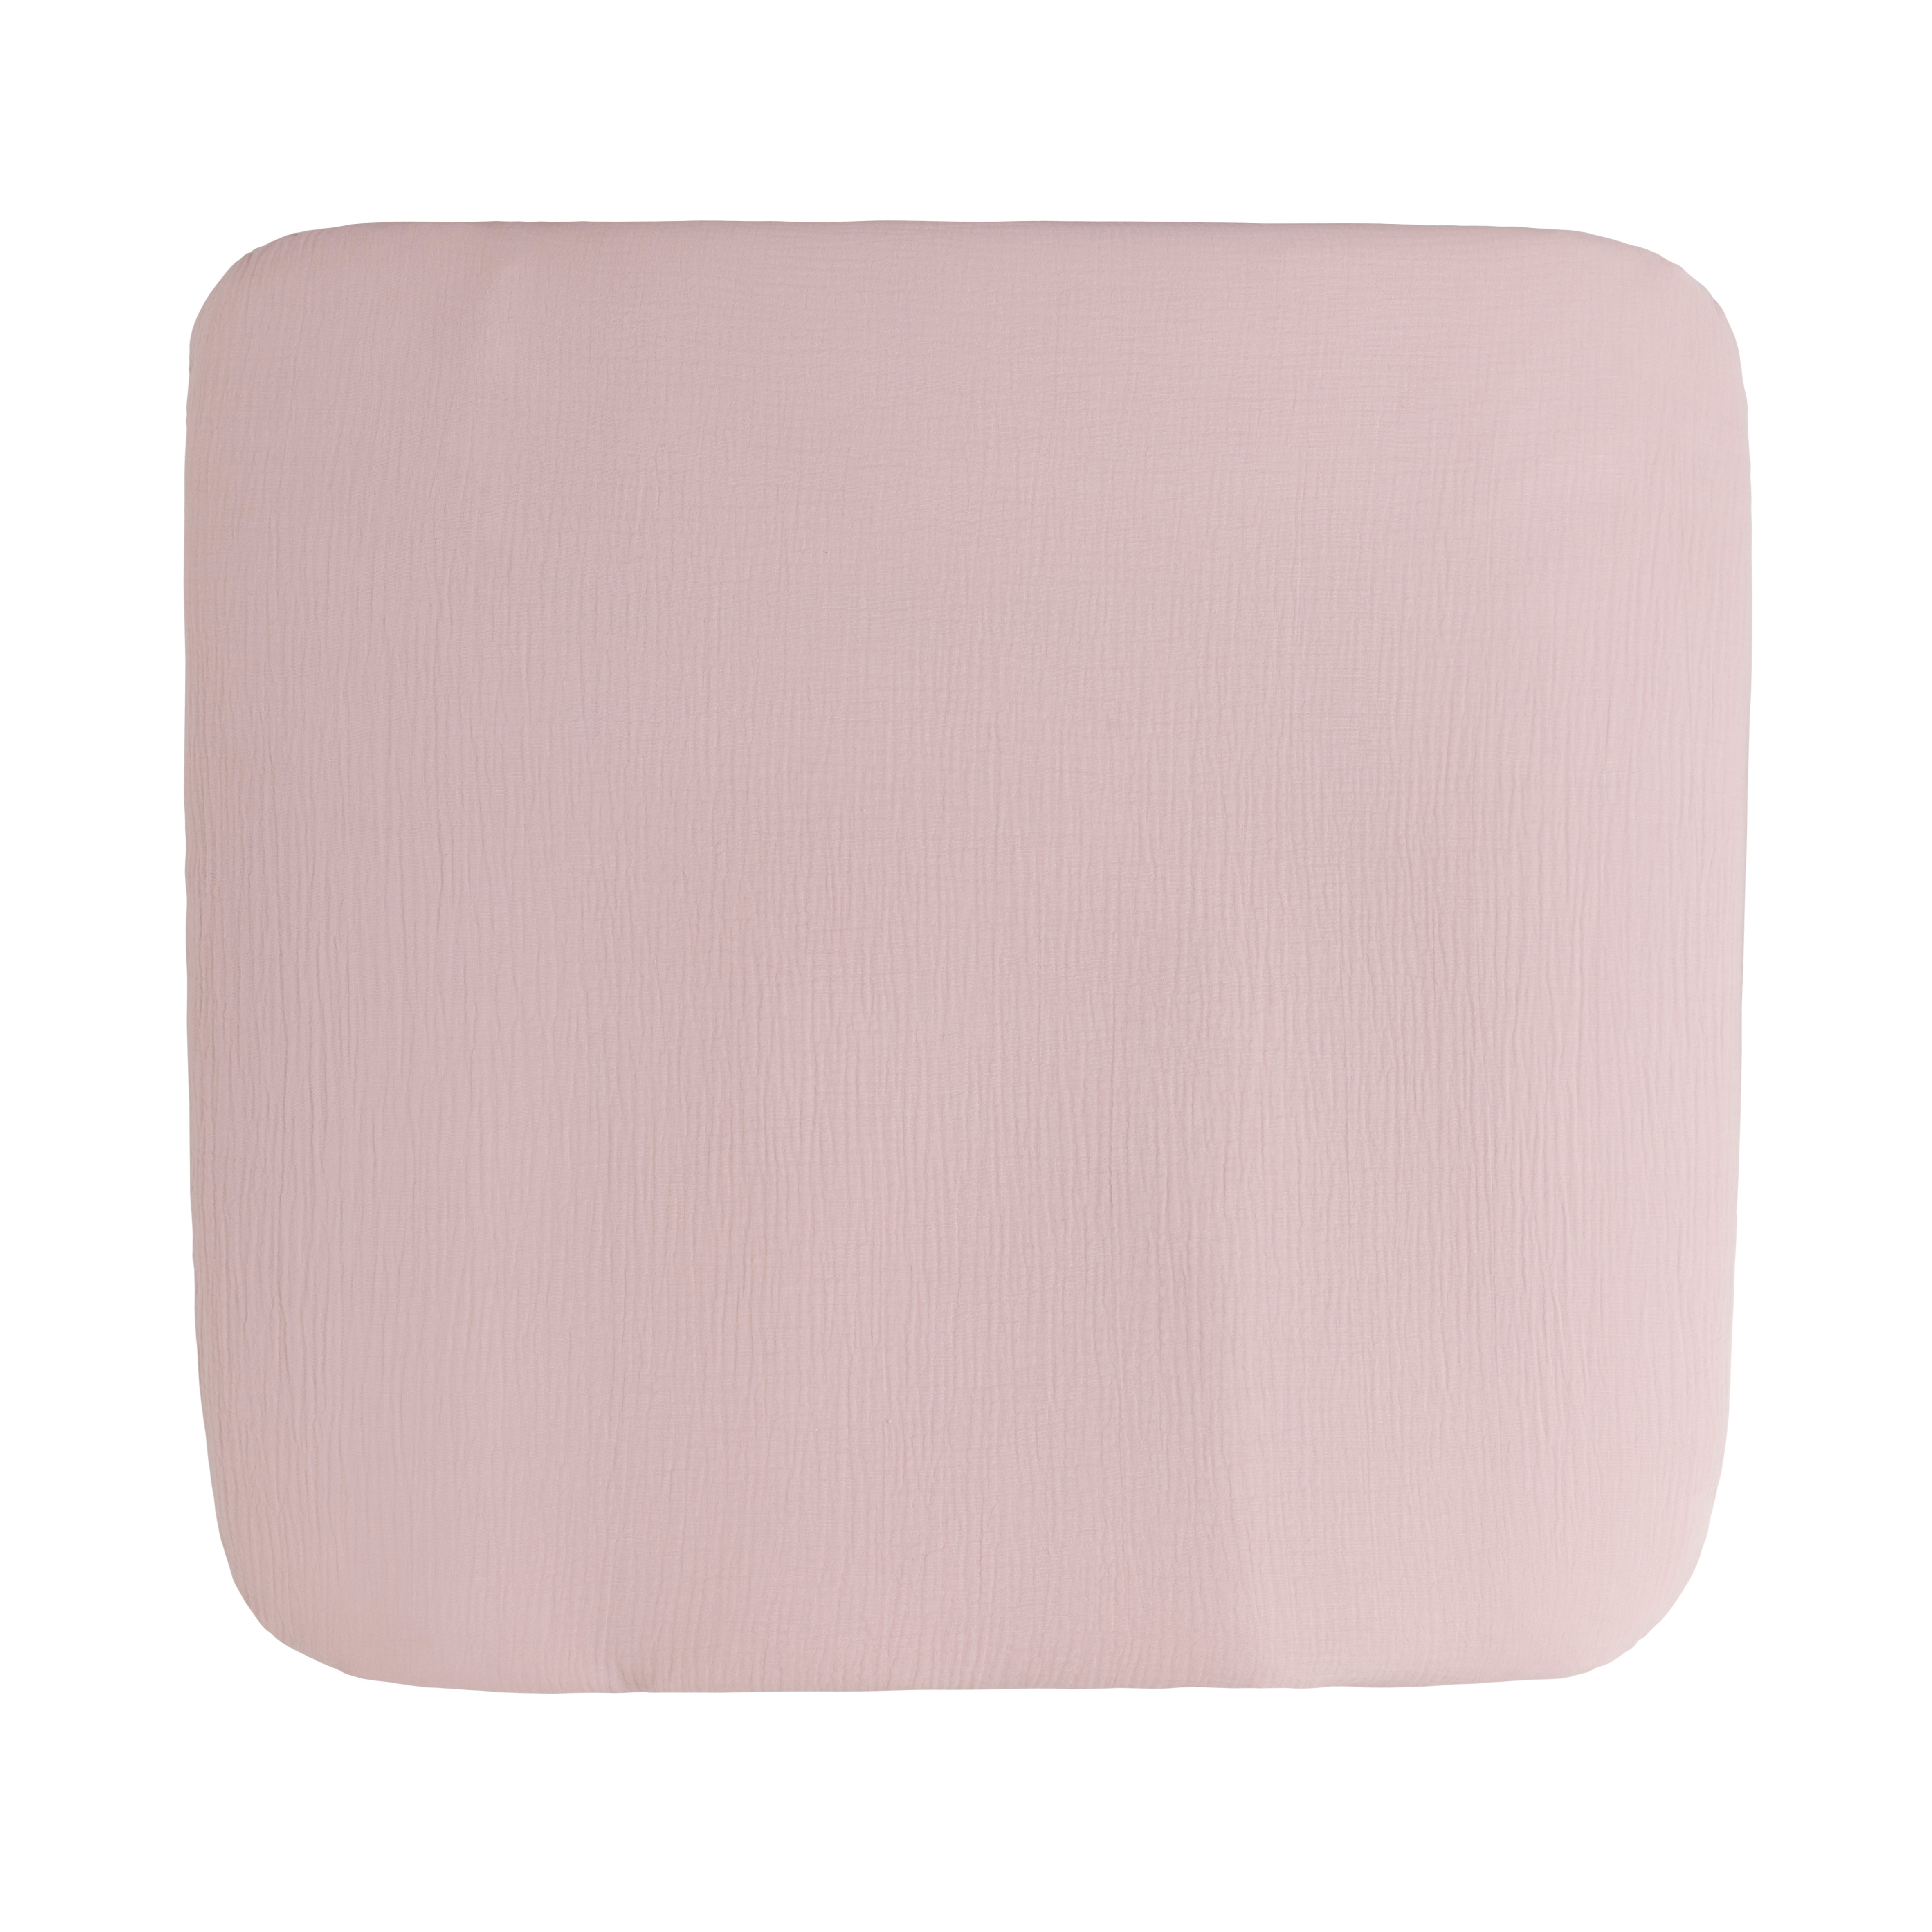 Changing pad cover Fresh ECO old pink - 75x85